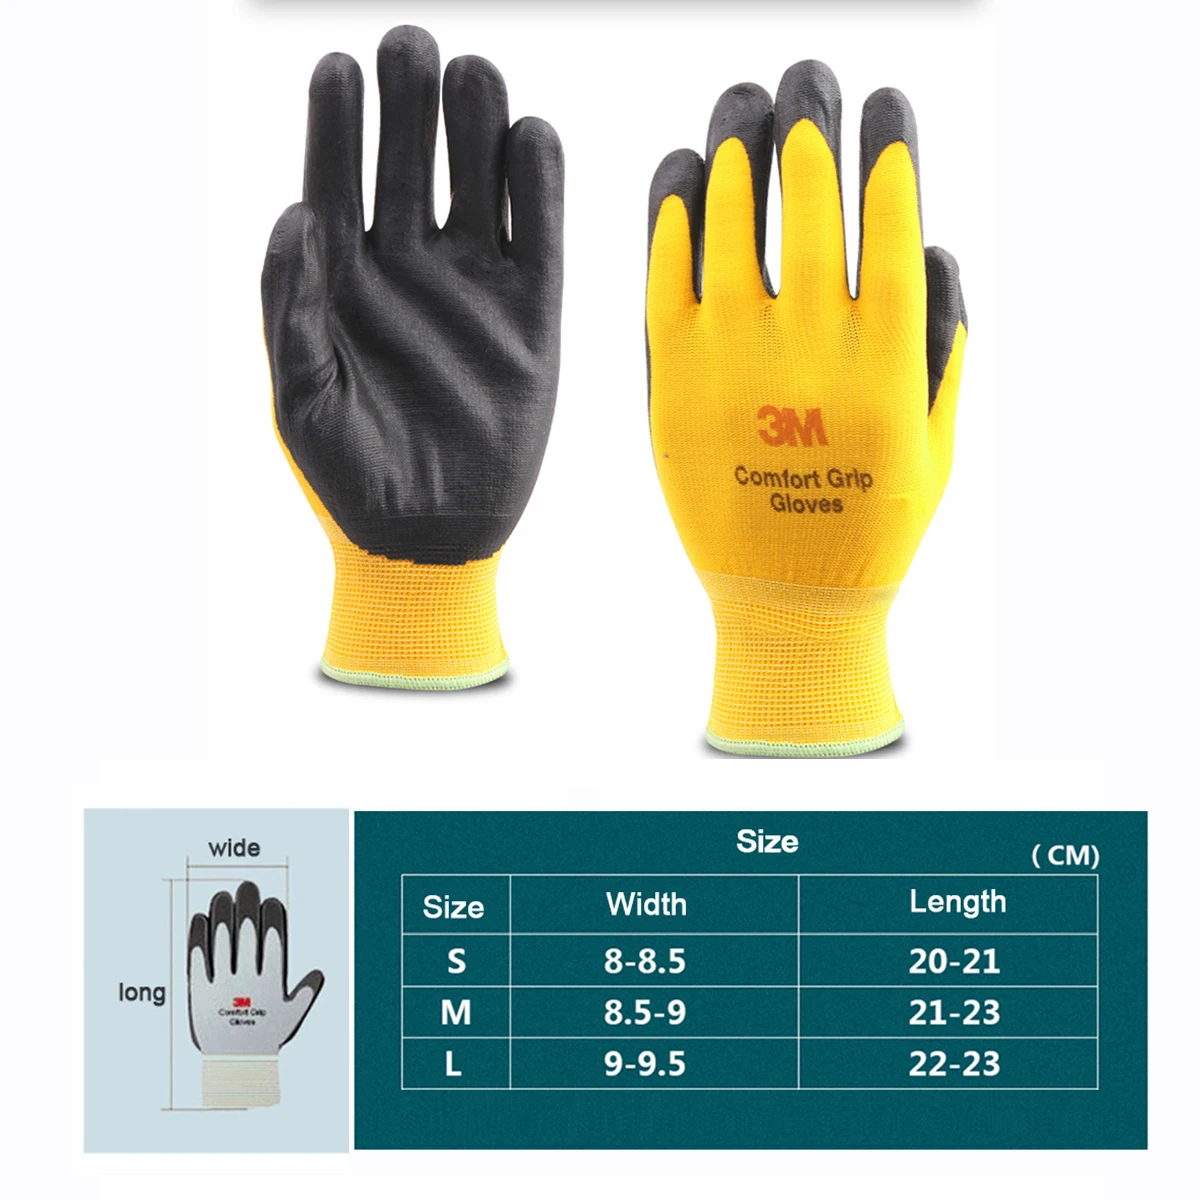 3M Thin Yellow Work Gloves Woman Nitrile Rubber Coated Grip Touch